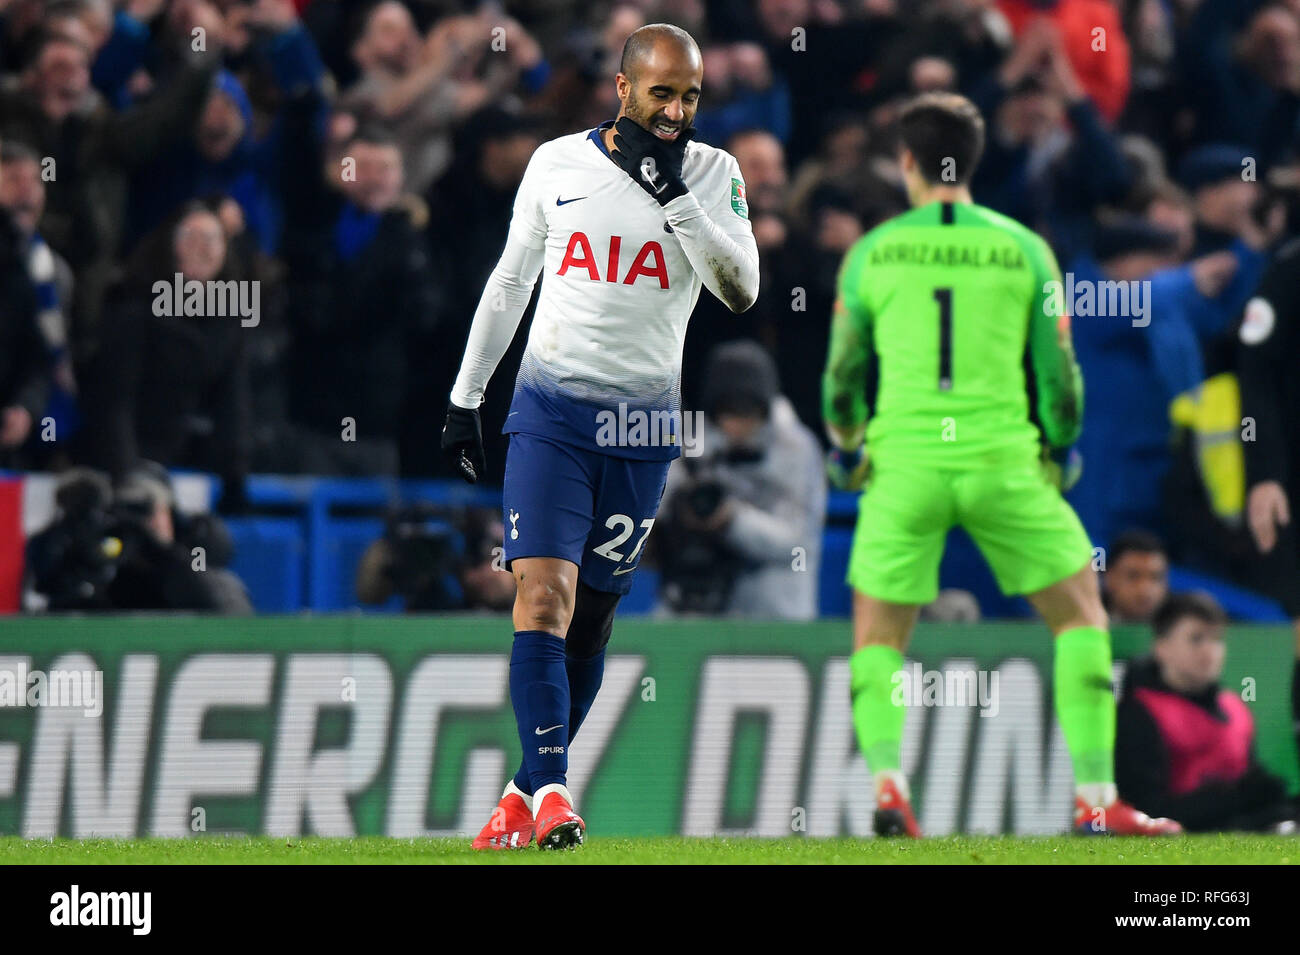 LONDON, UK 24 JANUARY Tottenham midfielder Lucas Moura has his penalty saved during the Carabao Cup match between Chelsea and Tottenham Hotspur at Stamford Bridge, London on Thursday 24th January 2019. (Photo Credit: MI News & Sport) Stock Photo